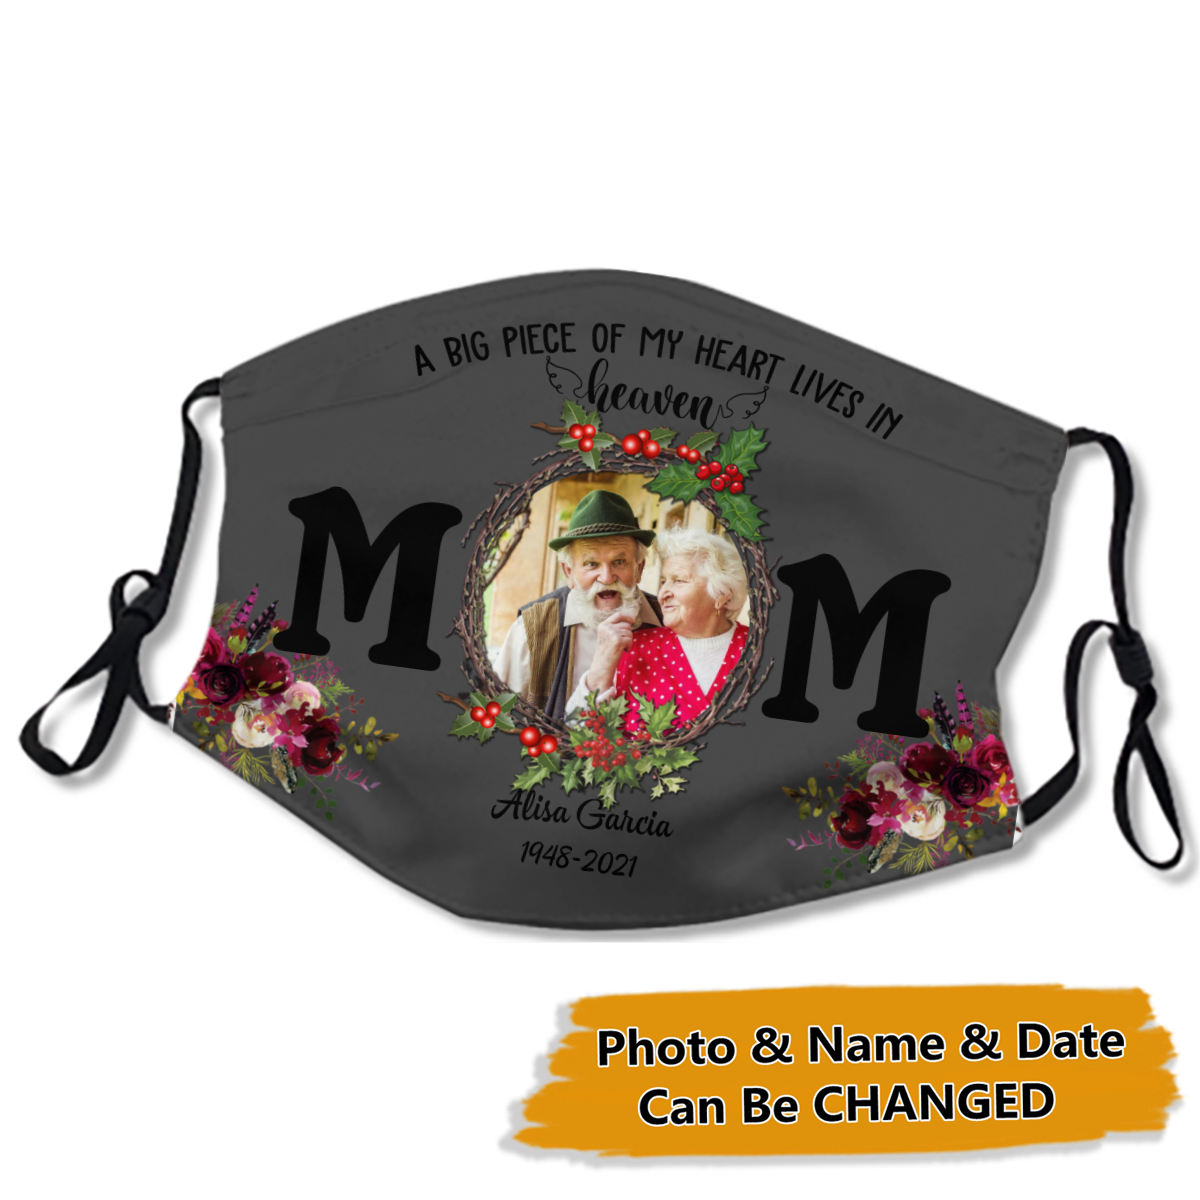 Message to Mother Memorial Upload Photo A Big Piece Of My Heart Lives In Heaven Personalized Face Mask